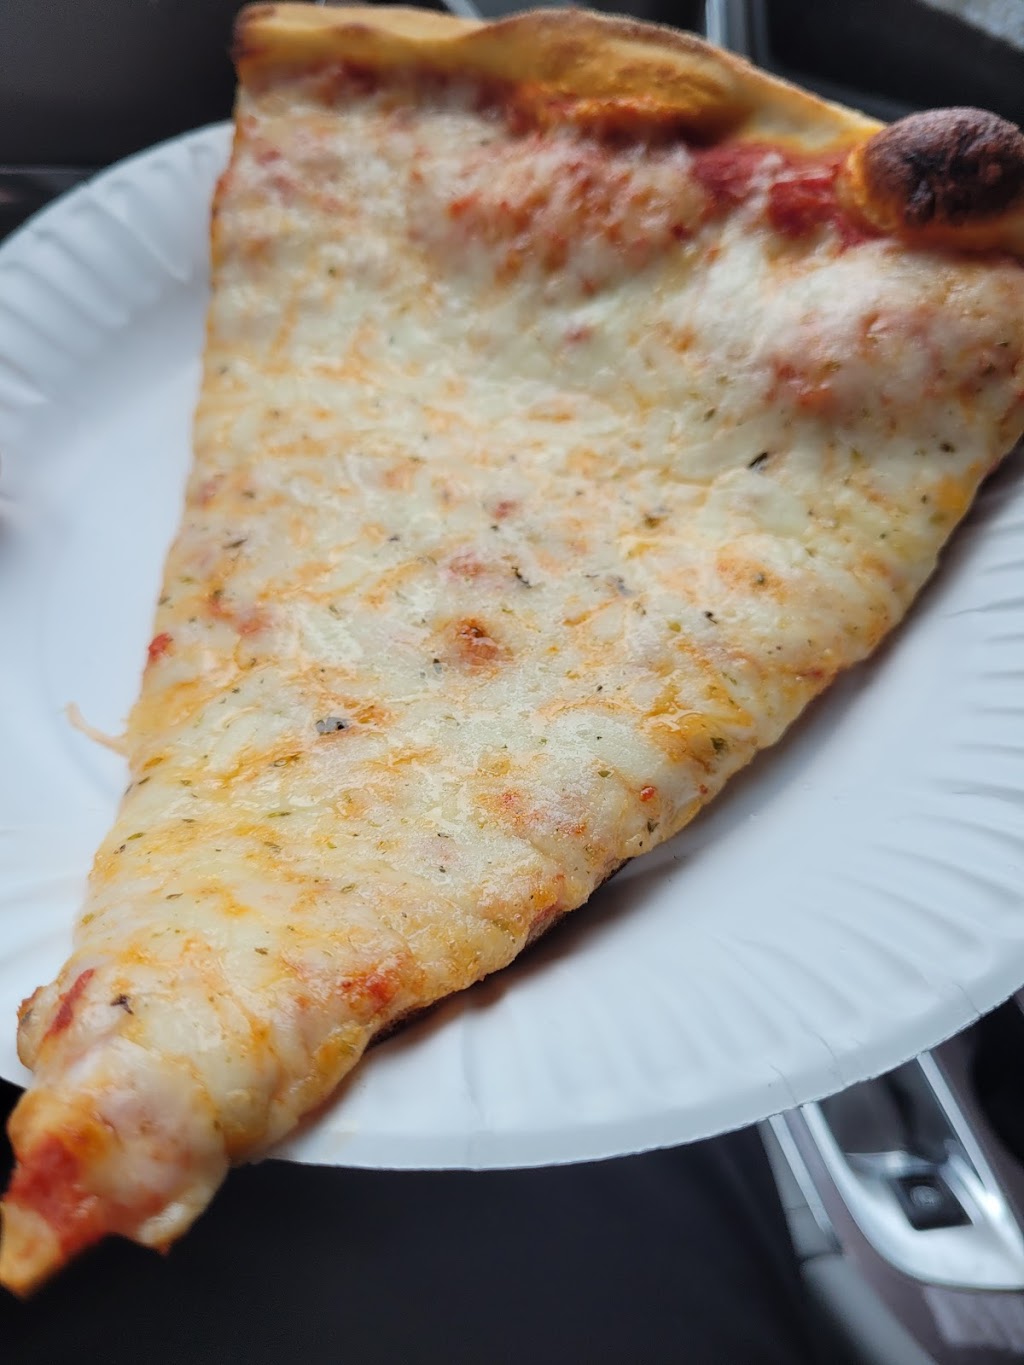 Giovannis Pizza | 1001 N 19th St, Allentown, PA 18104 | Phone: (610) 820-7111